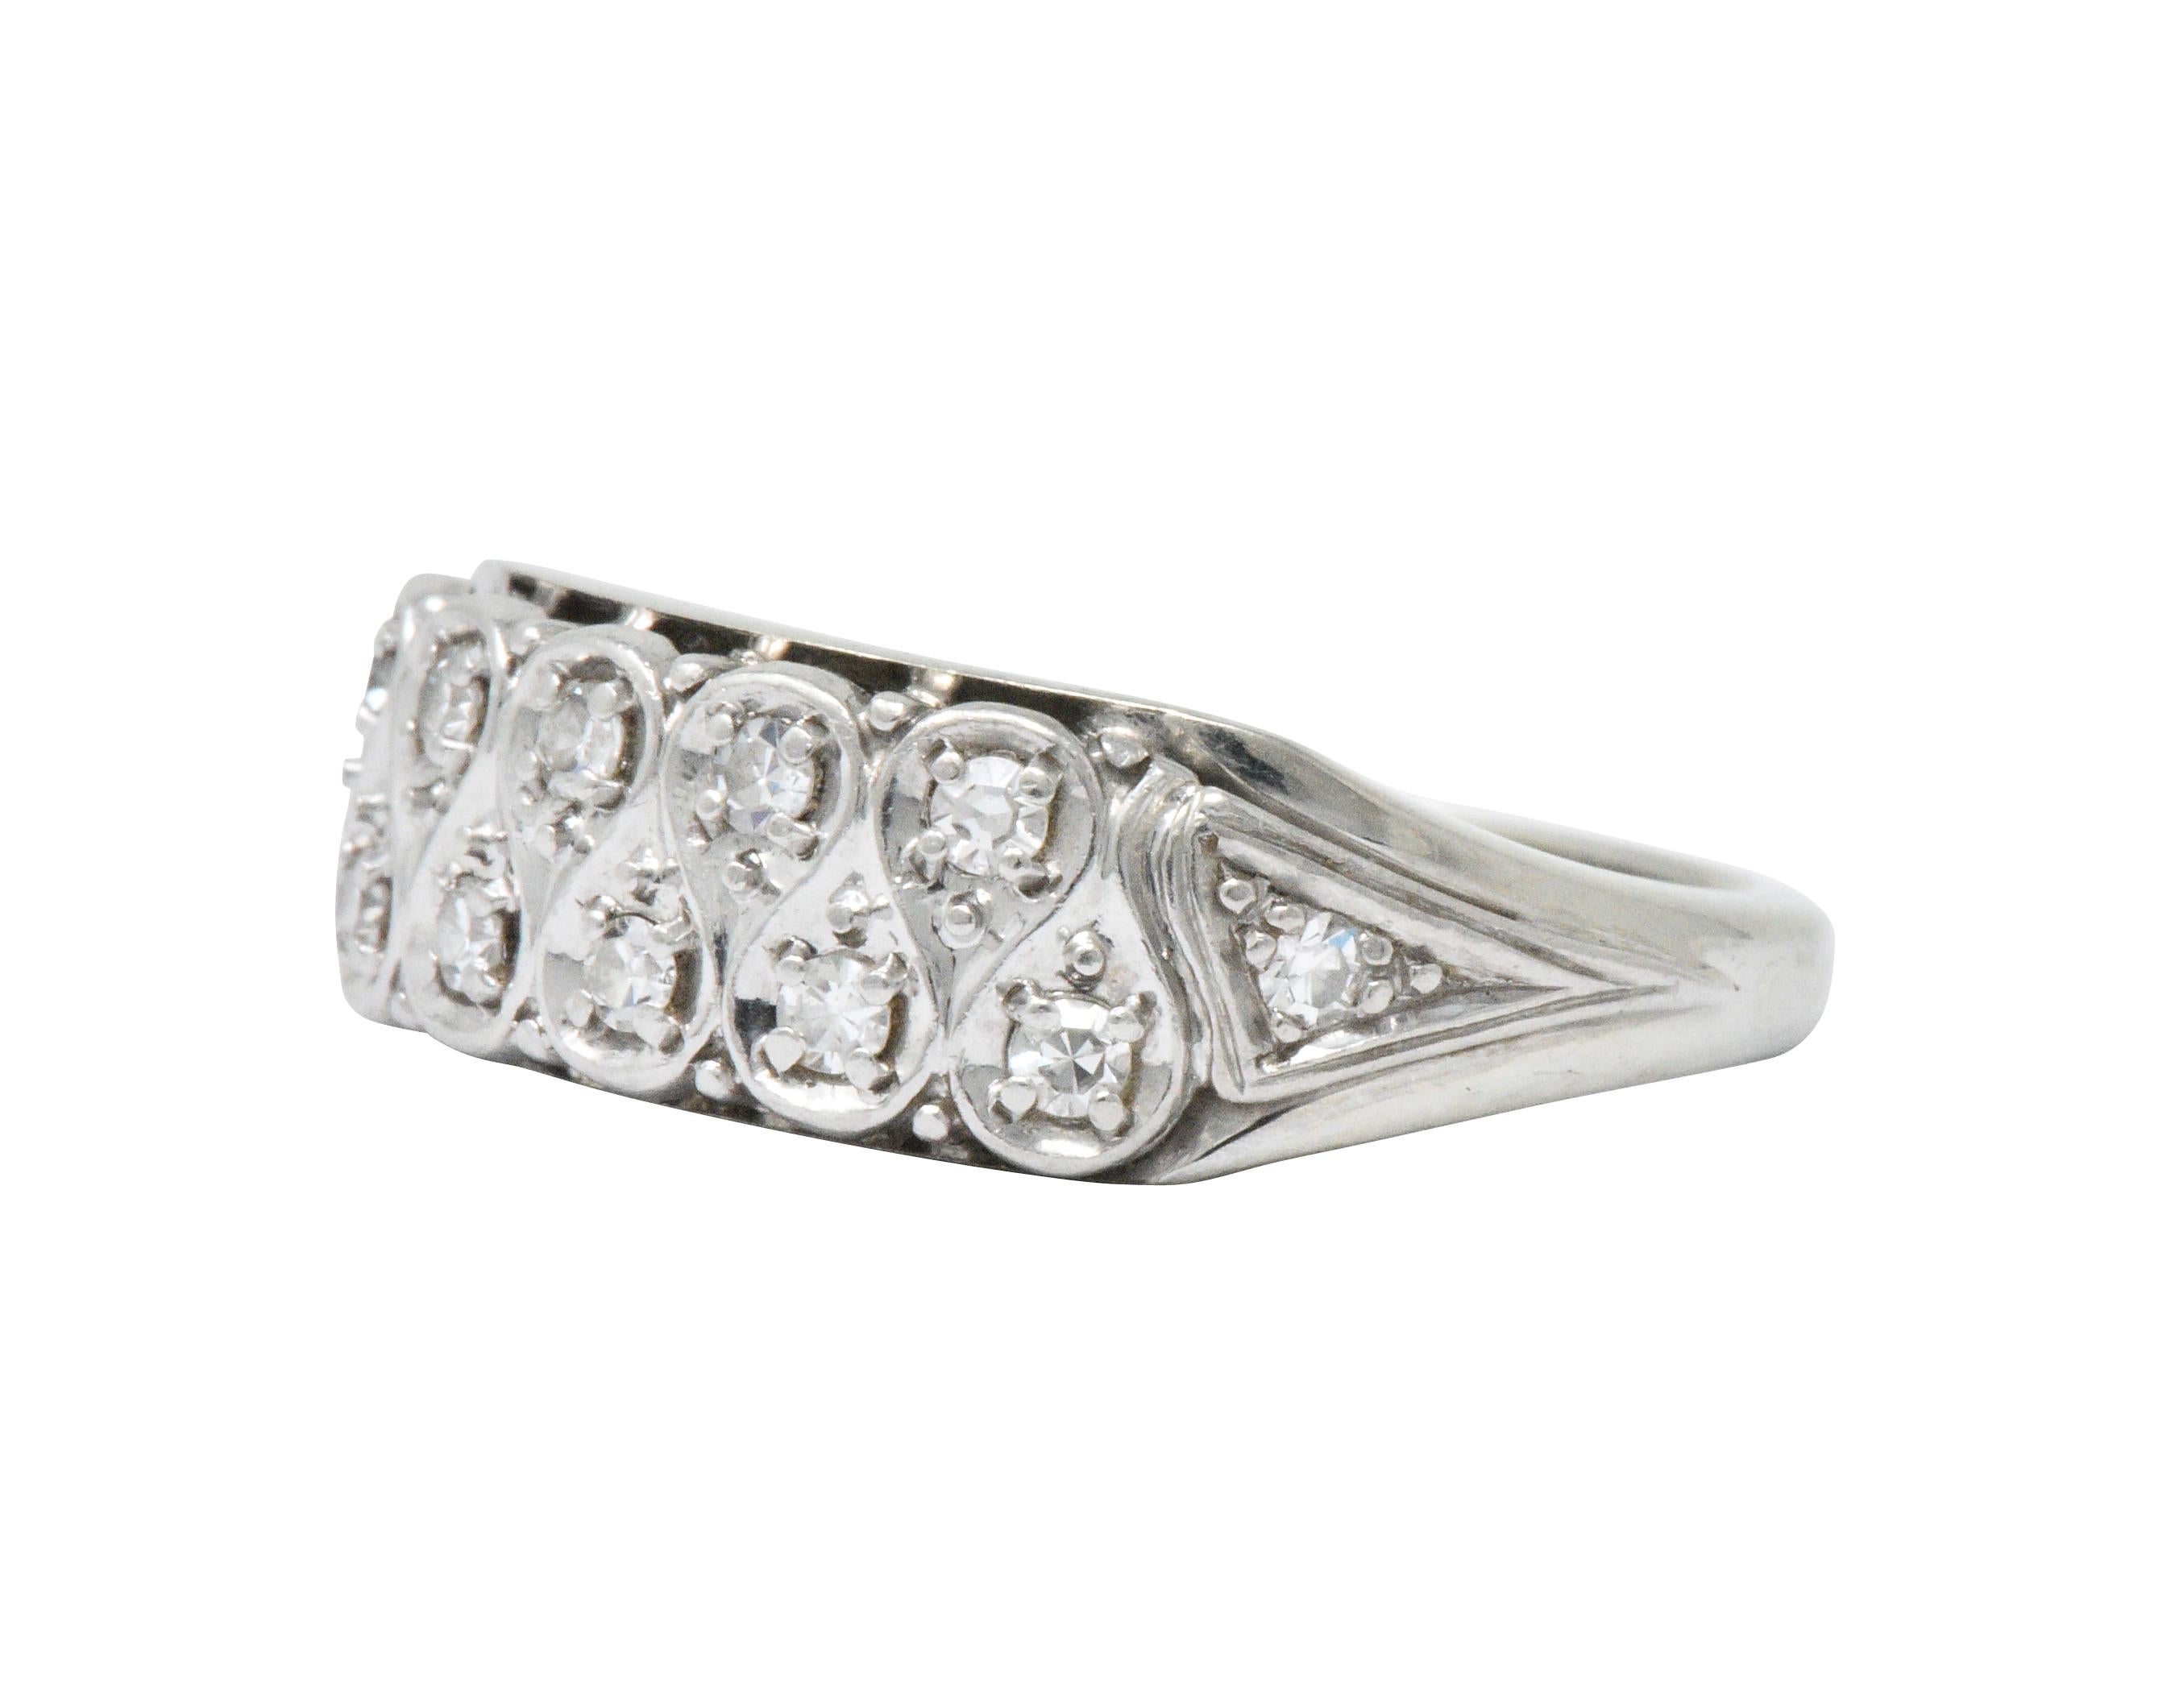 Set to the front with single cut diamonds, weighing approximately 0.20 carats total, eye-clean and white

Undulating ribbon style motif 

Ring Size: 6 & Sizable

Top measures 6.8 mm and sits 3.5 mm high

Total Weight: 4.4 Grams

Tested as 18k